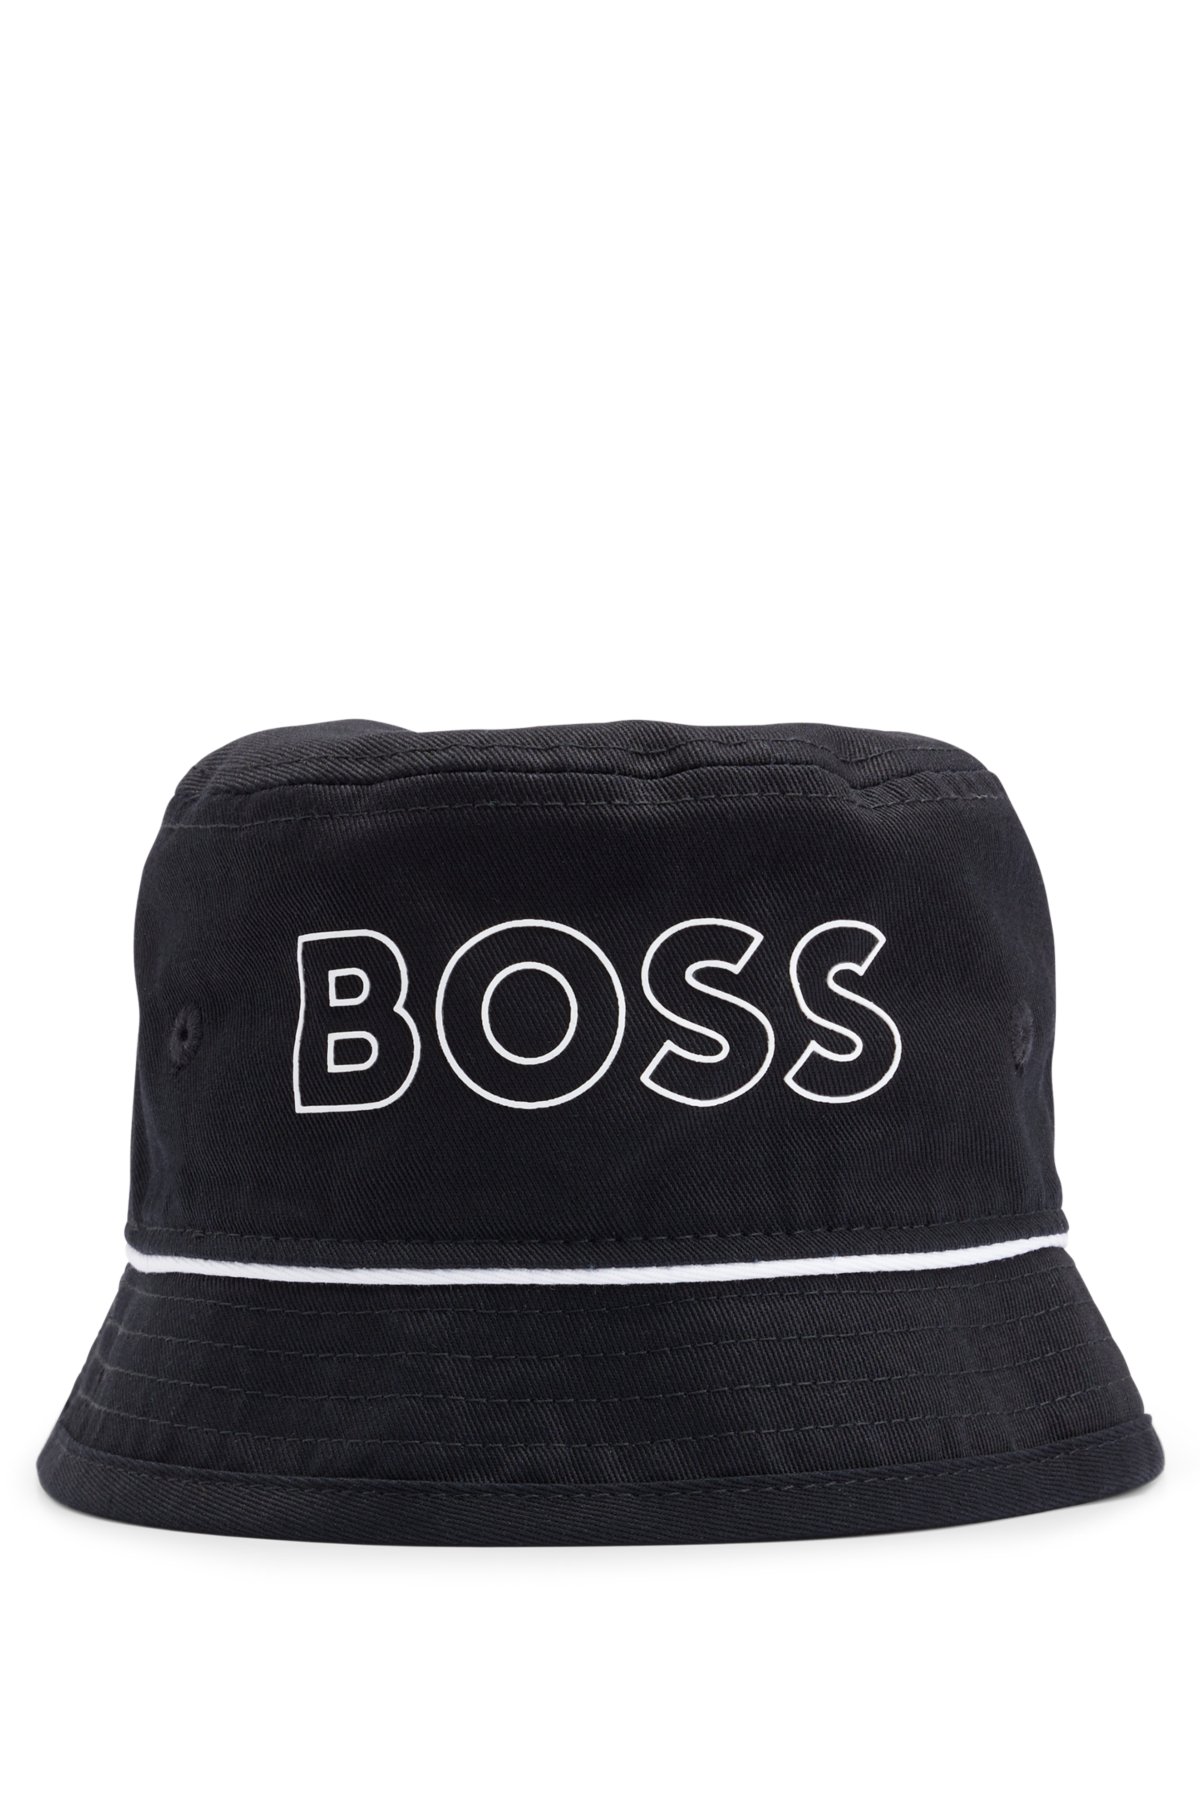 BOSS - Kids' bucket hat in cotton twill with contrast logo